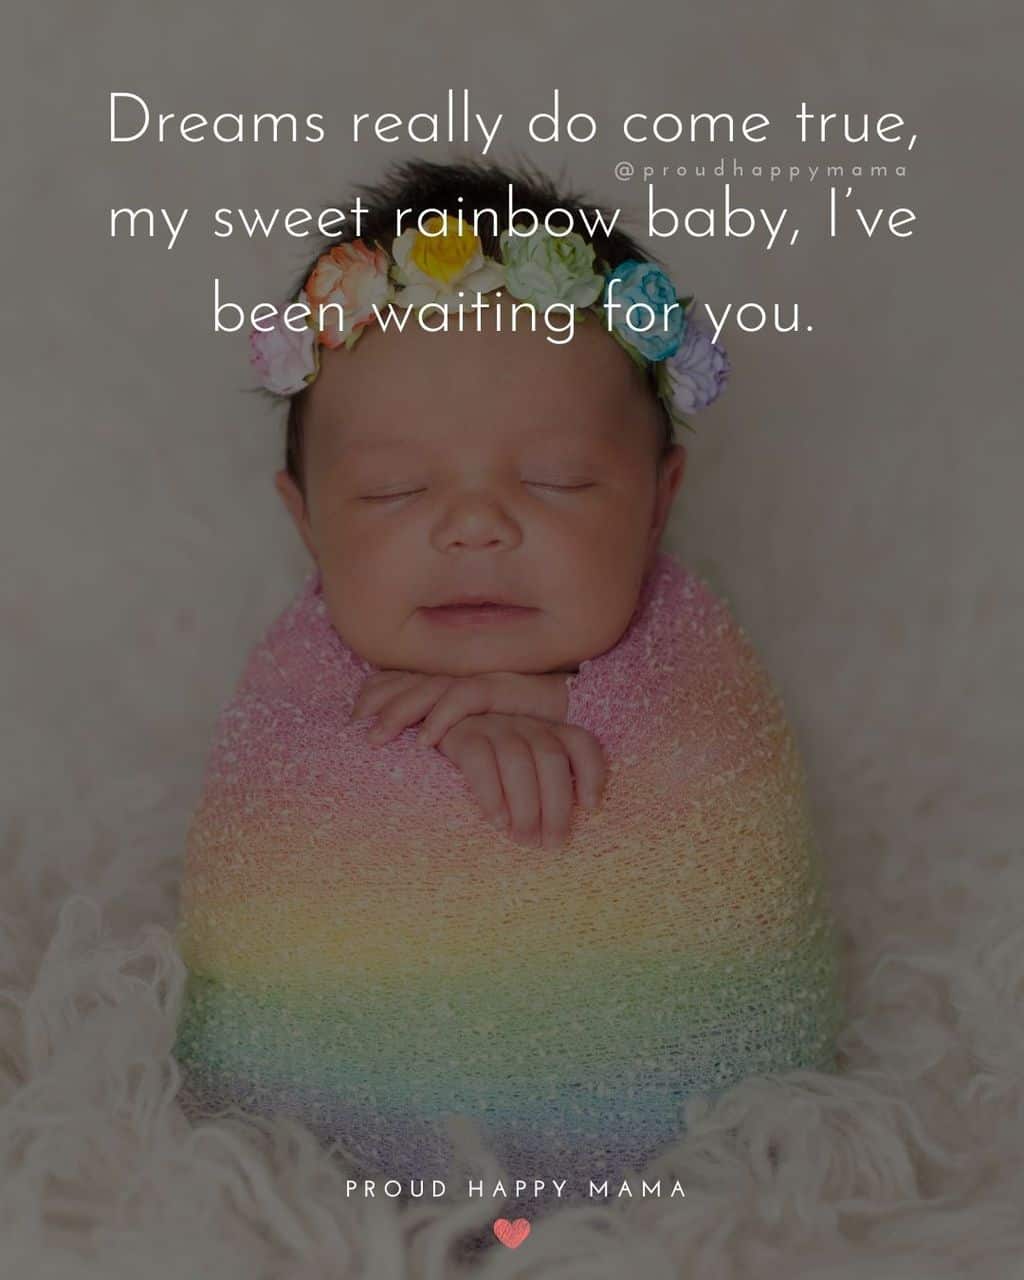 Rainbow Baby Quotes - Dreams really do come true, my sweet rainbow baby, Ive been waiting for you.